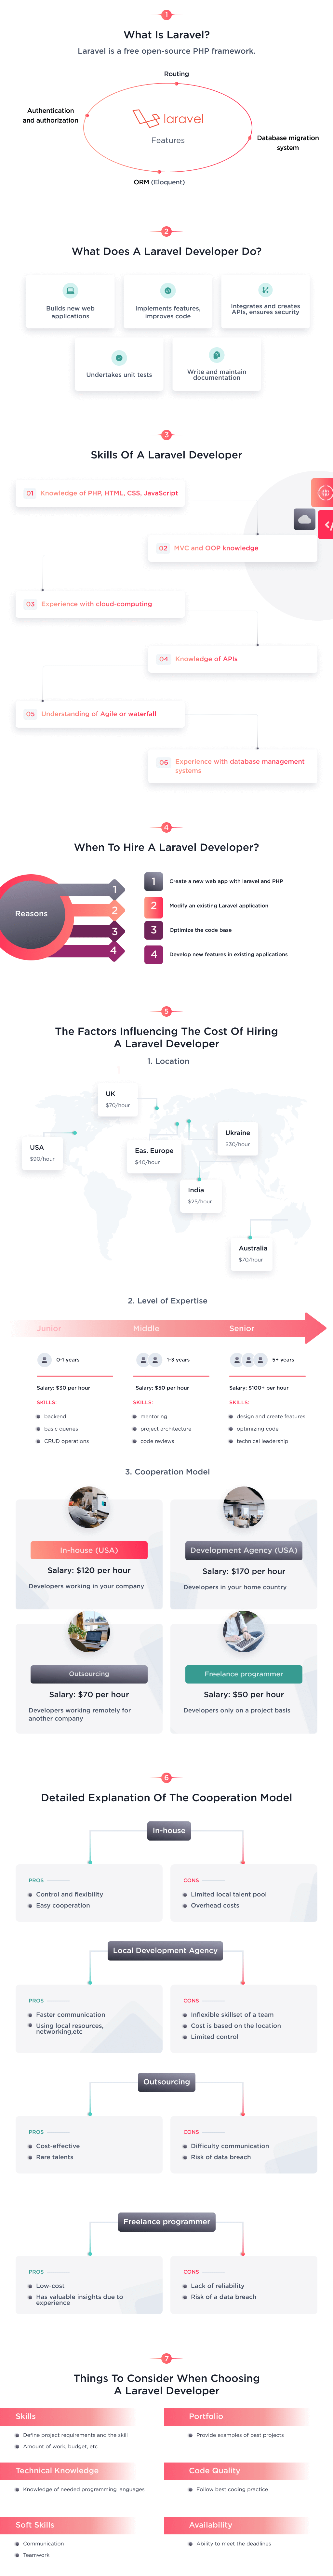 This infographic shows what steps you need to do to hire a Laravel developer 